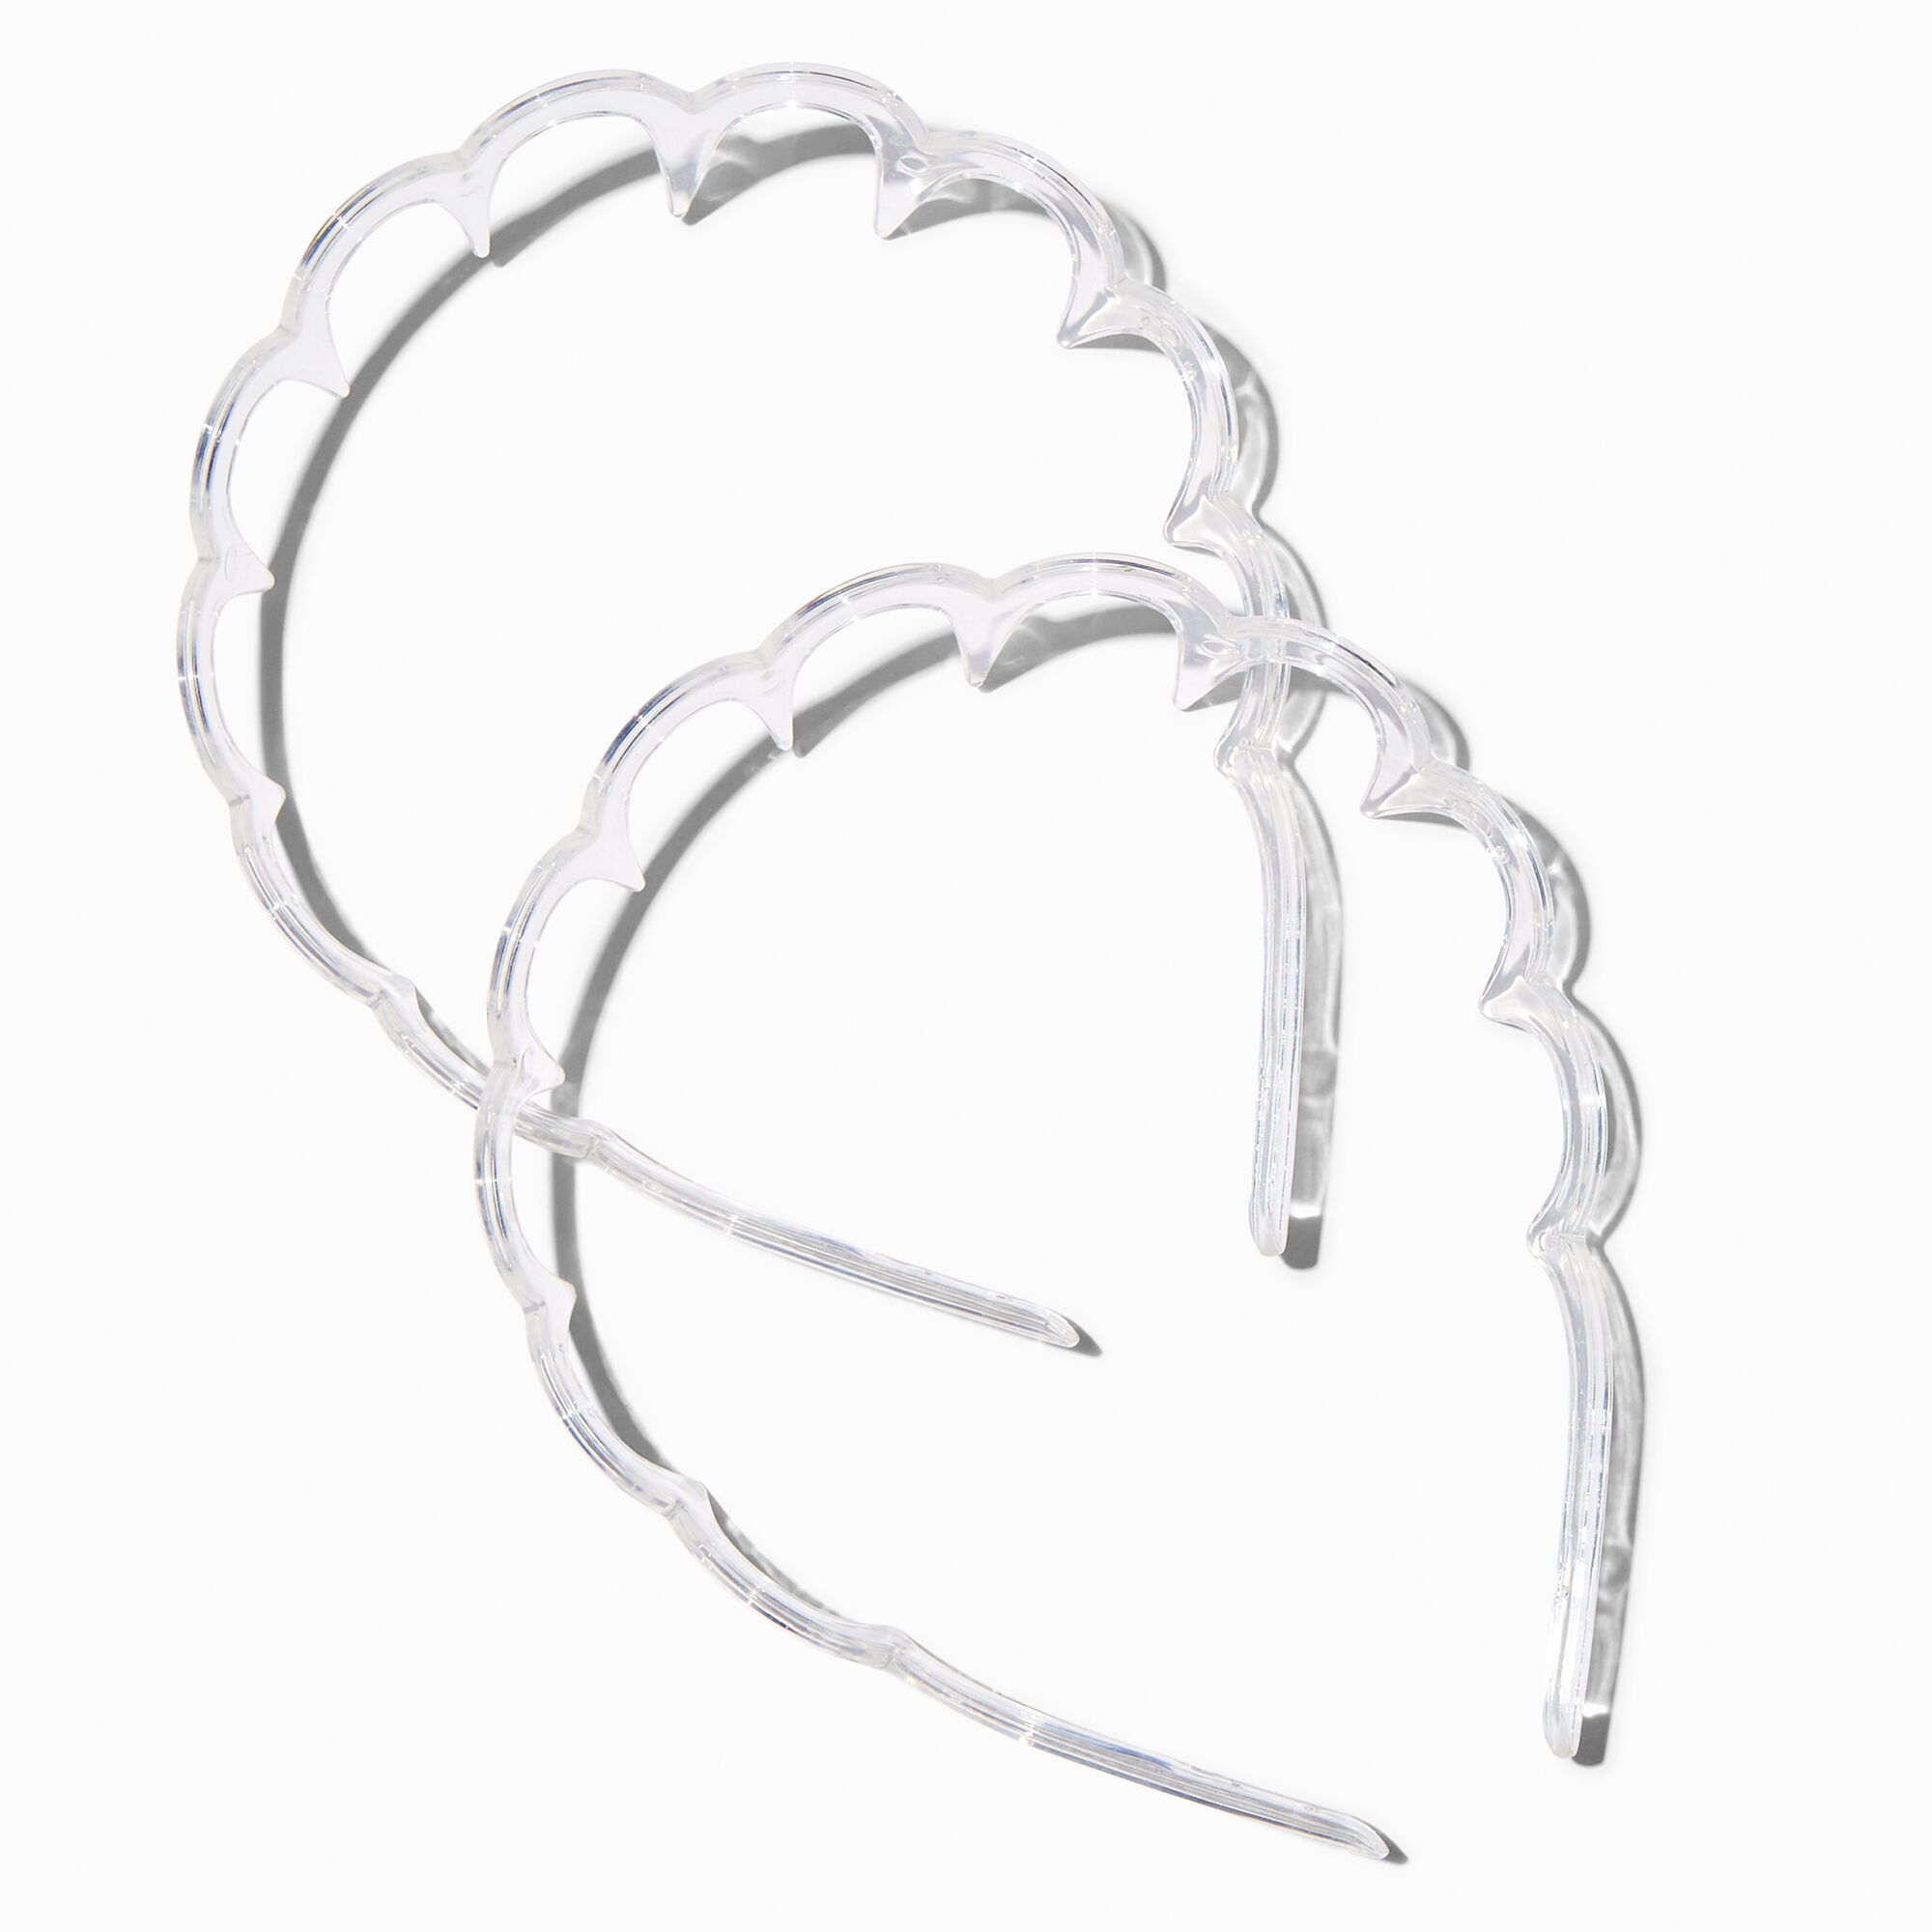 View Claires Clear Scalloped Headbands 2 Pack information